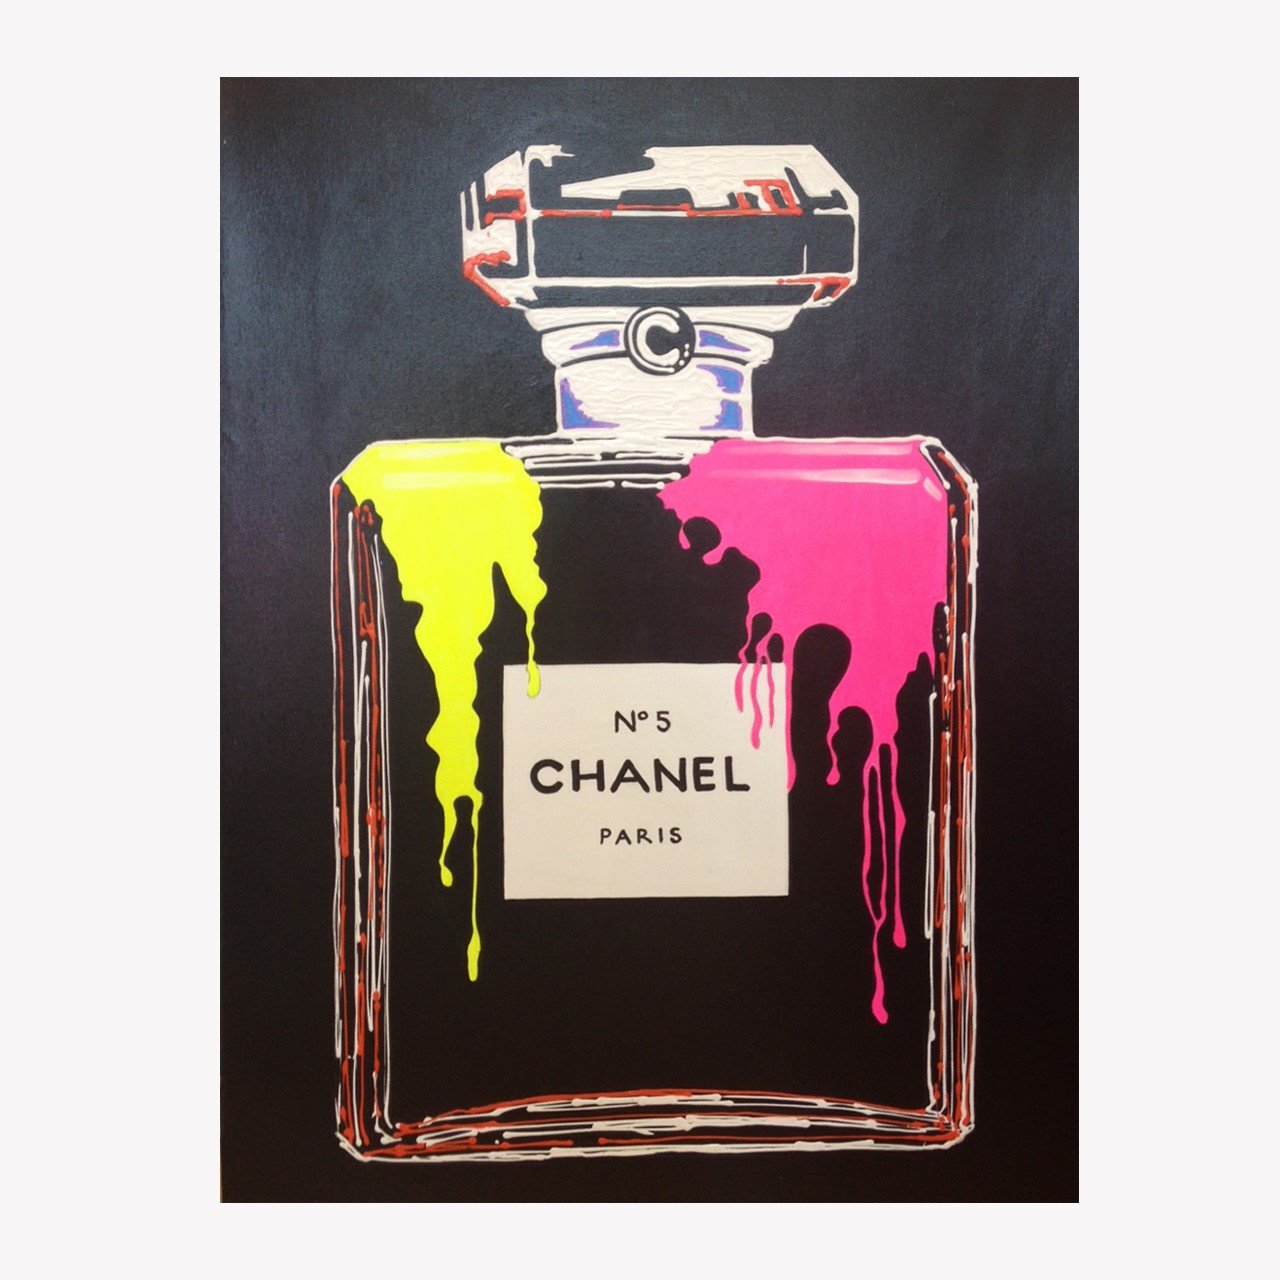 Chanel Canvas Painting at PaintingValley.com | Explore collection of ...